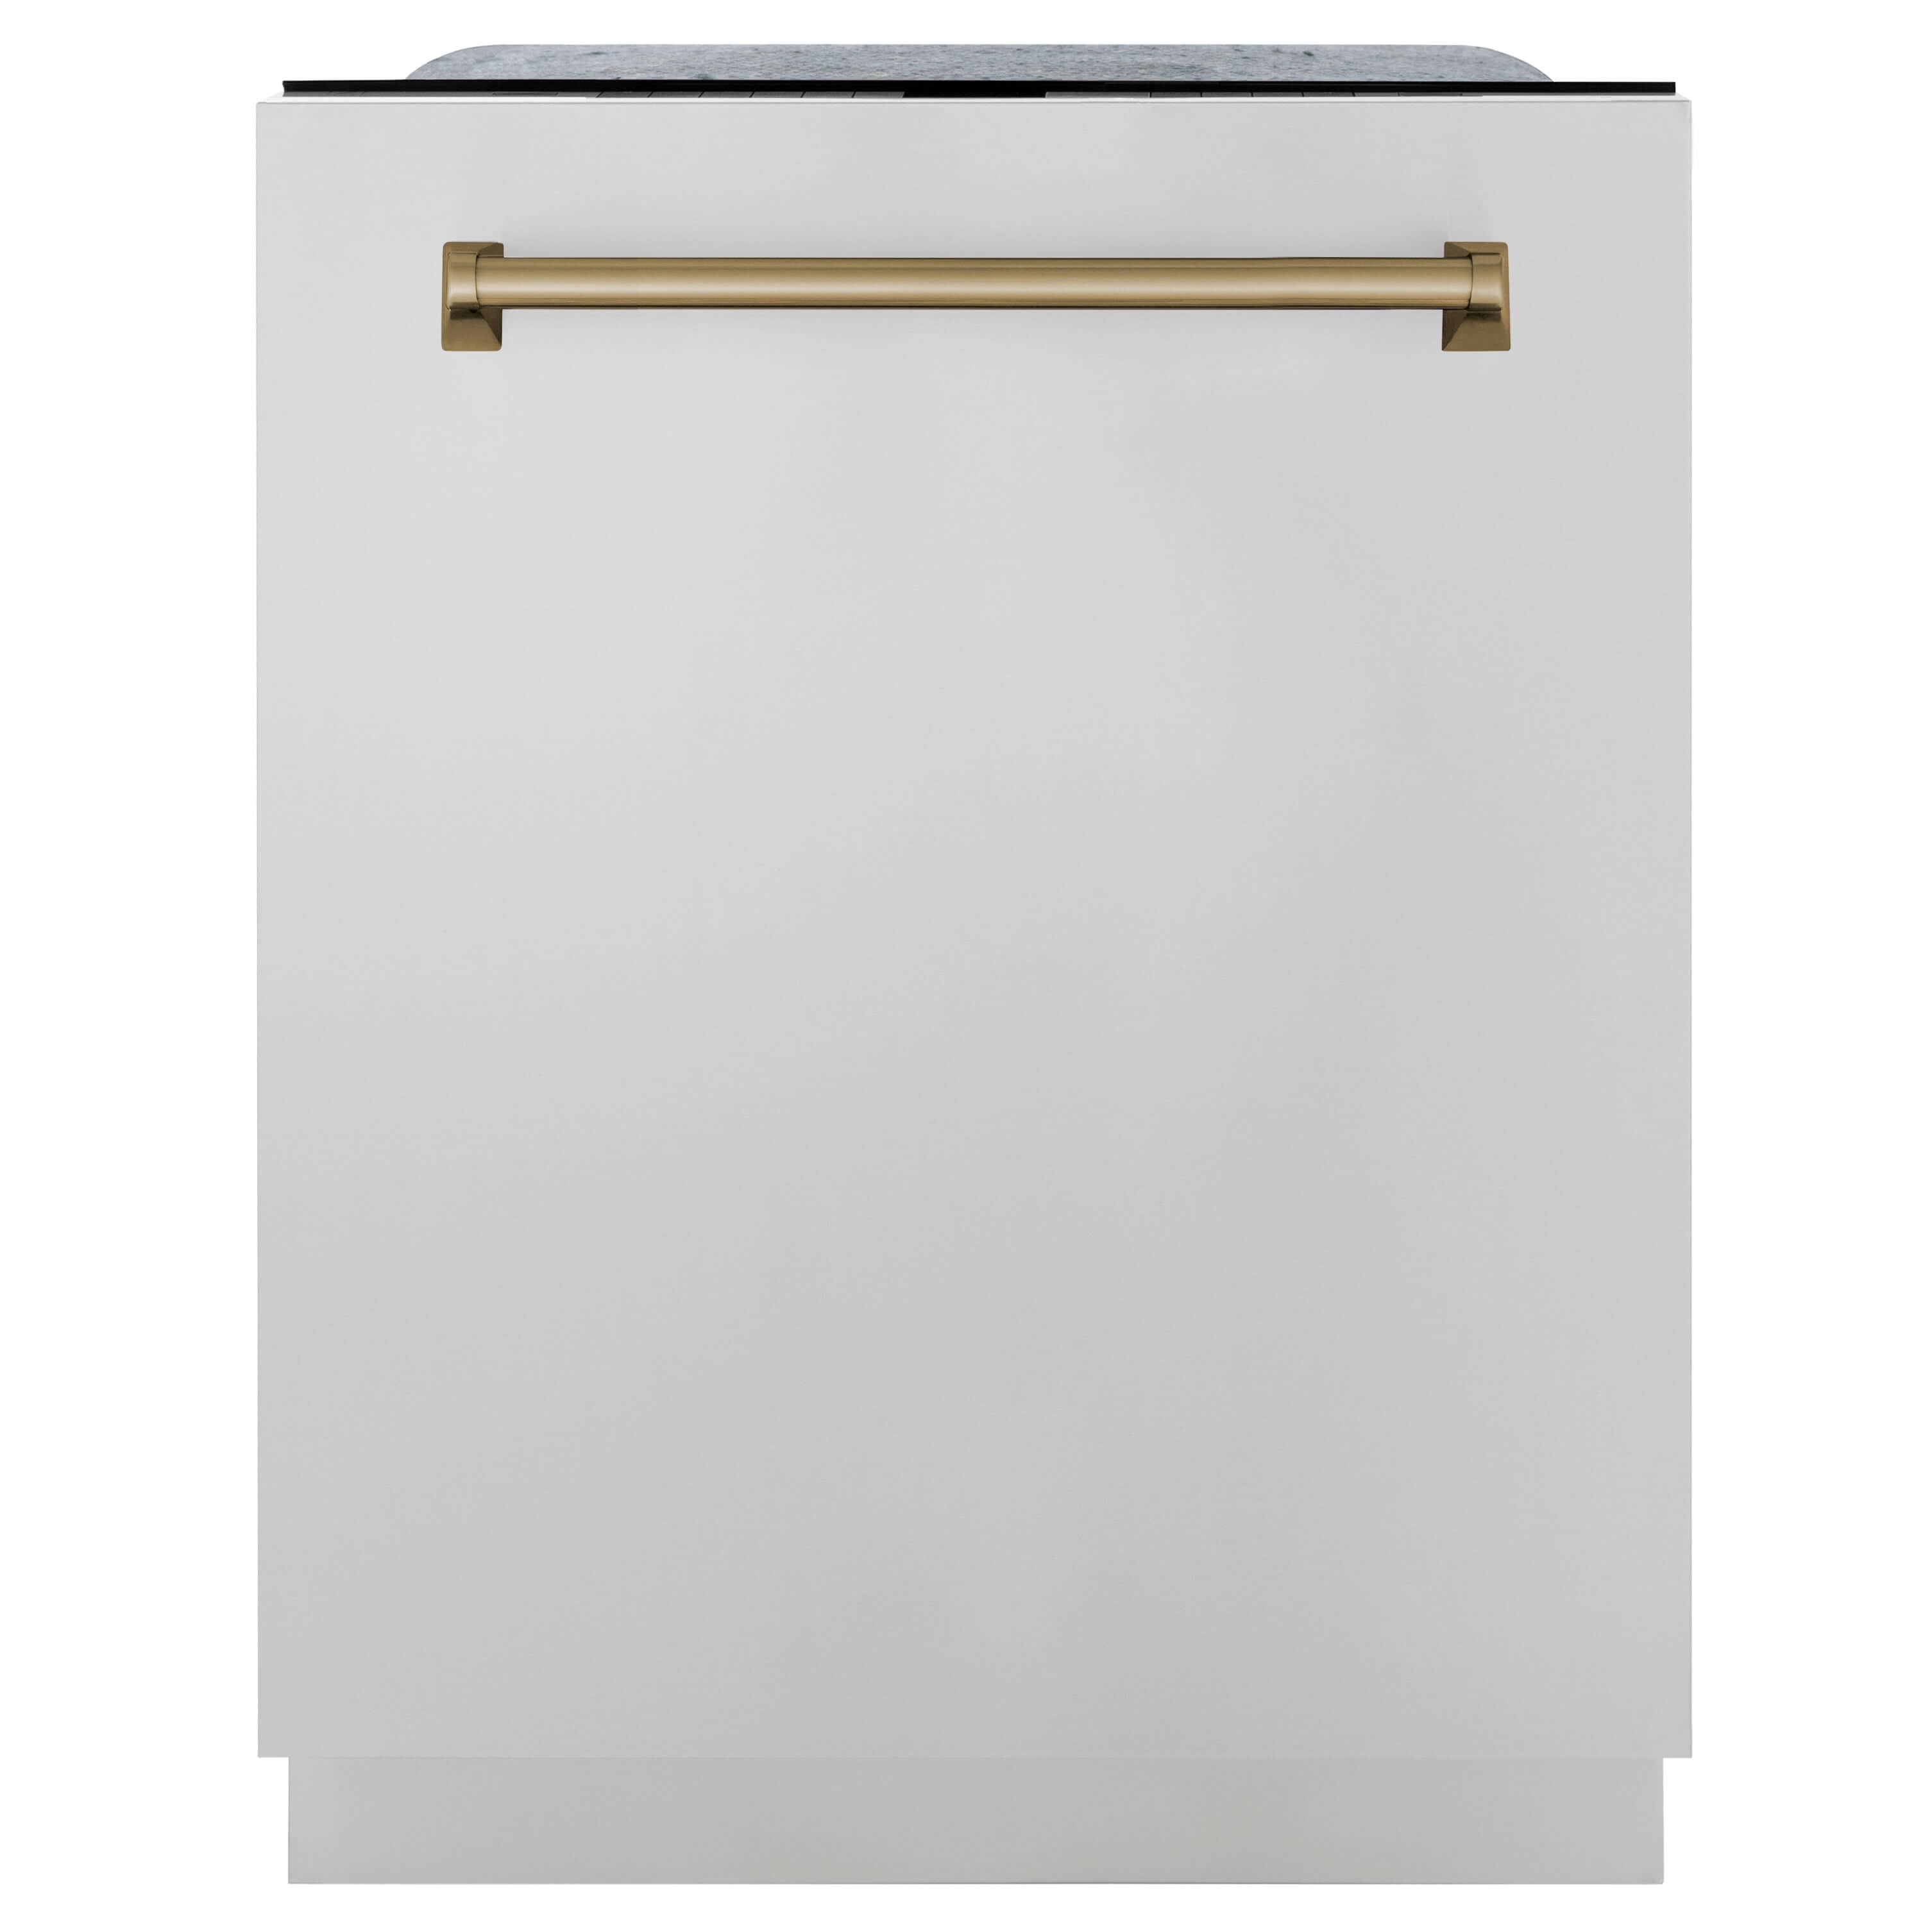 ZLINE Autograph Edition 24 in. Tall Tub Dishwasher with Stainless Steel panel and Champagne Bronze Handle front.